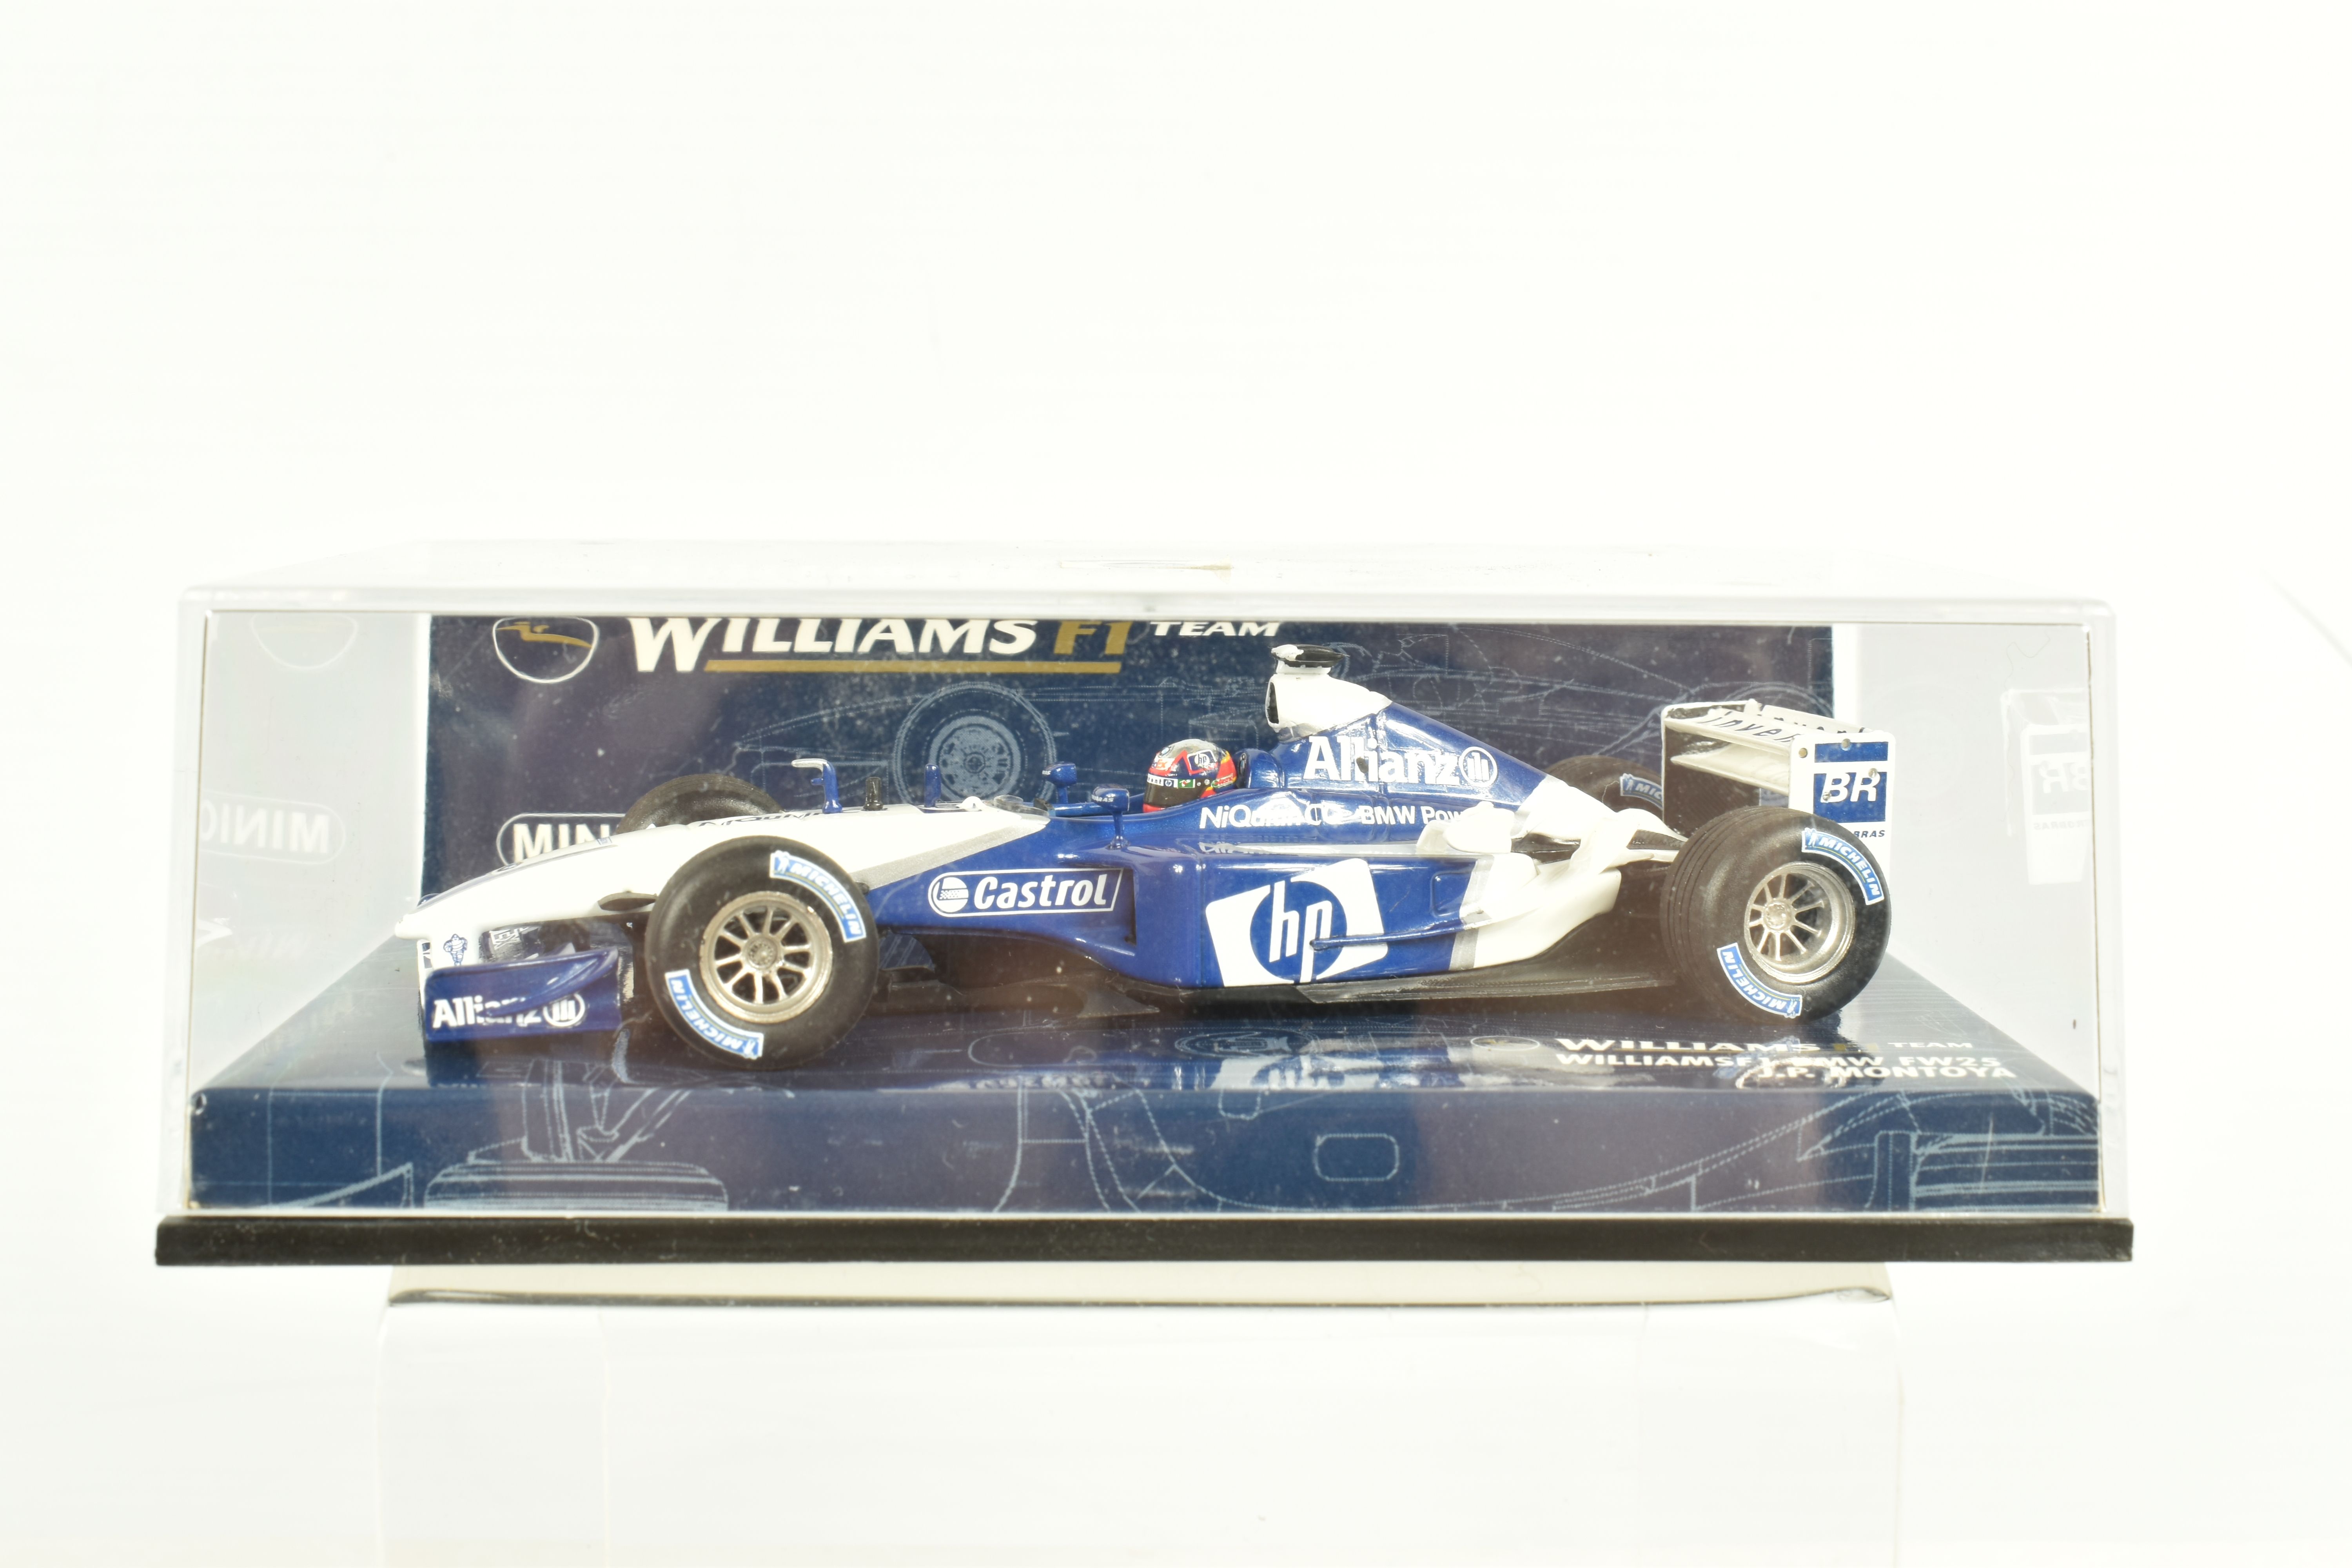 SEVEN MINICHAMP 1.43 SCALE DIECAST MODELS, to include a Williams F1 BMW RW26 JP Montoya, model no. - Image 7 of 16